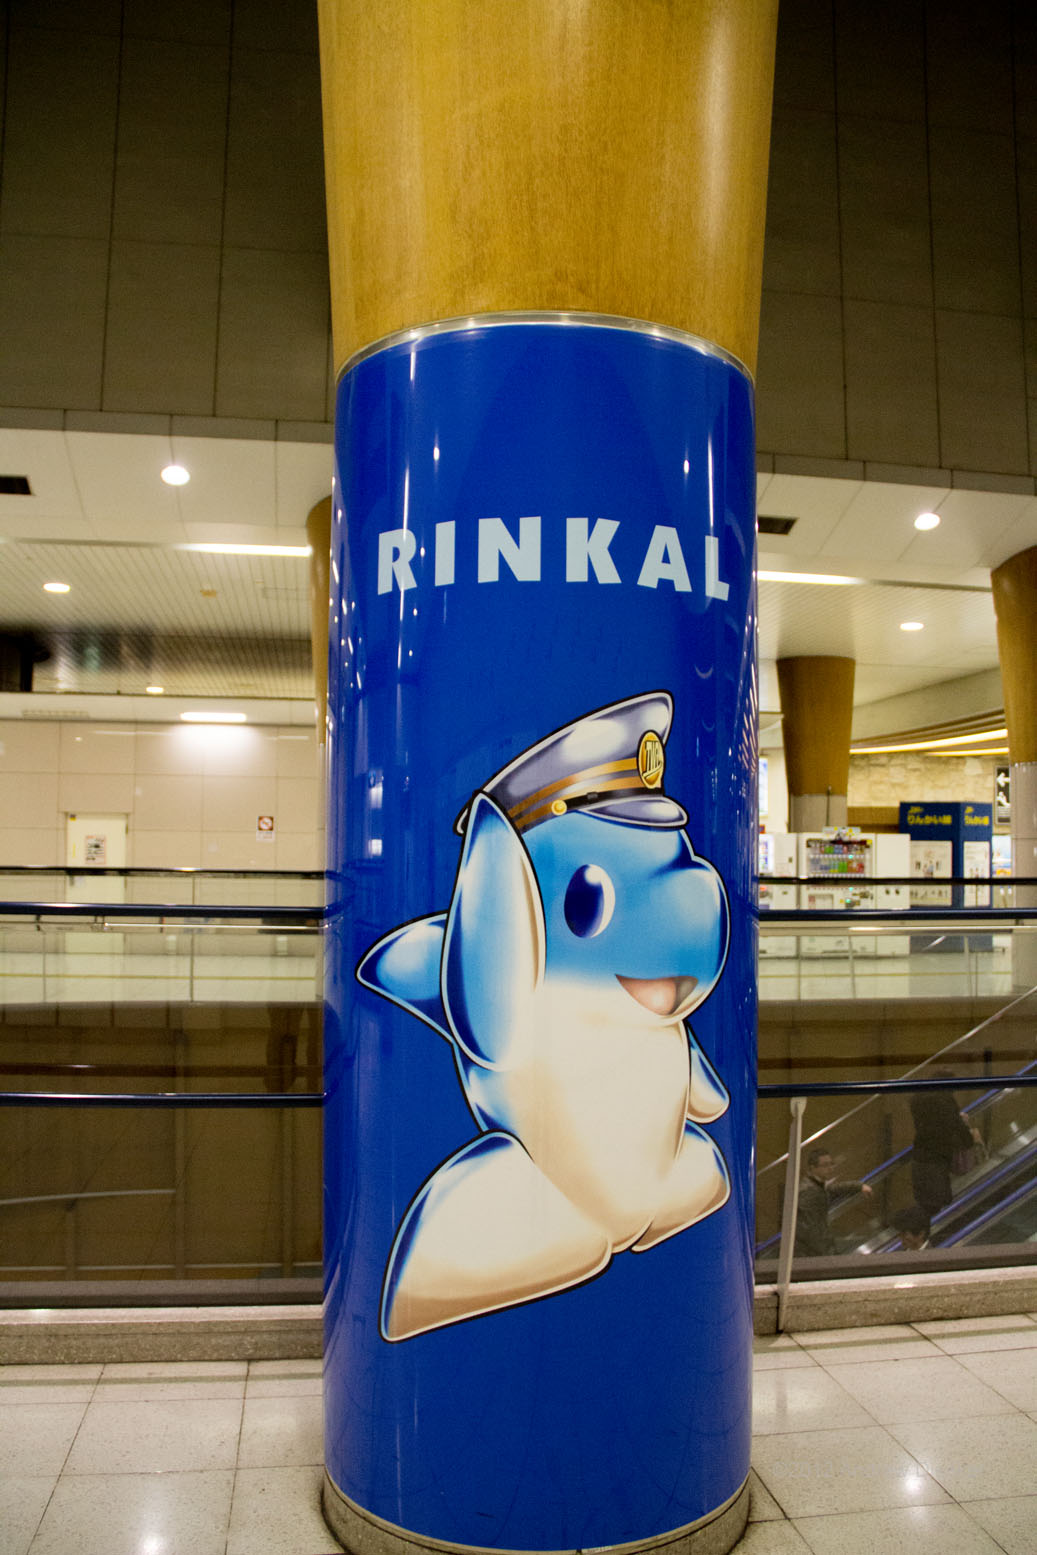 Ah Rinkal the dolphin, mascot of the Rinkai subway line.  Japanese people have a love of cute things that personify things in their lives...